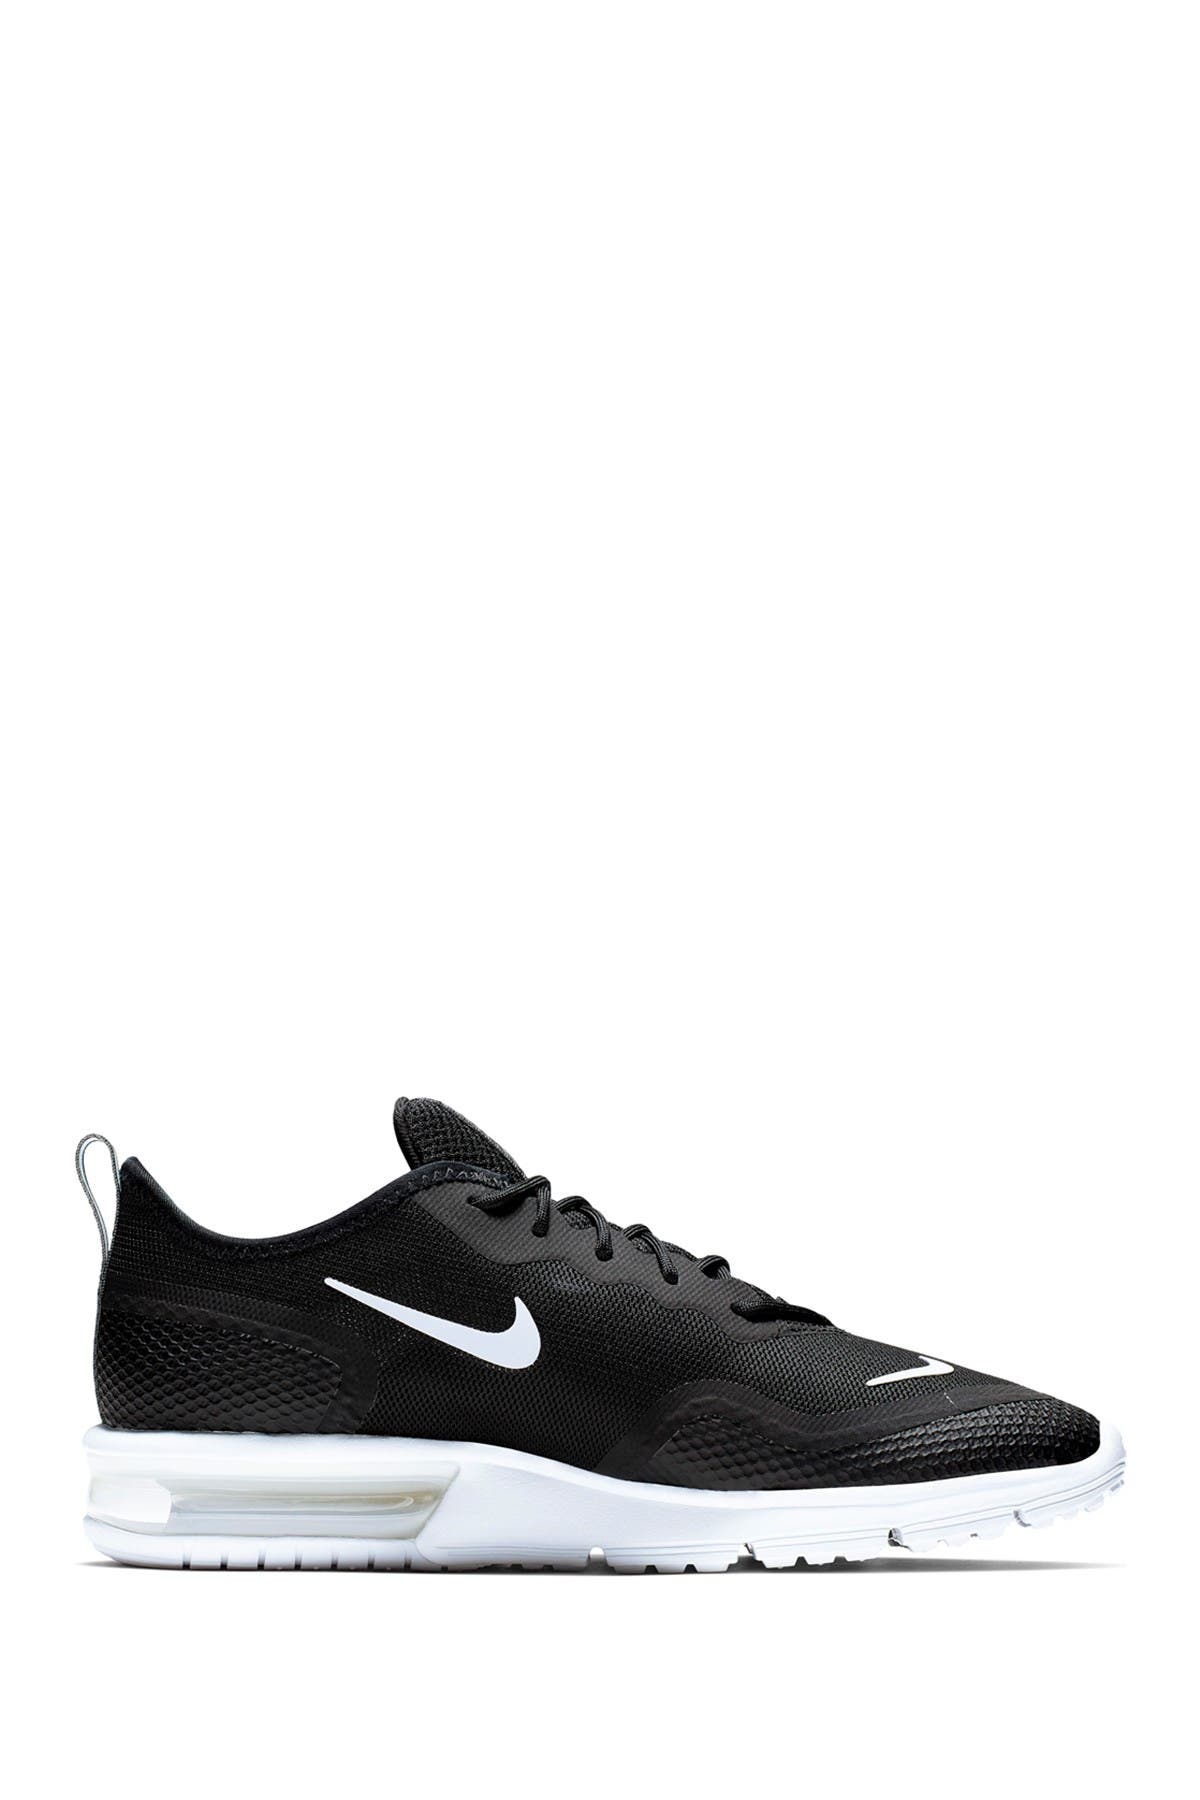 nike sequent 4.5 se